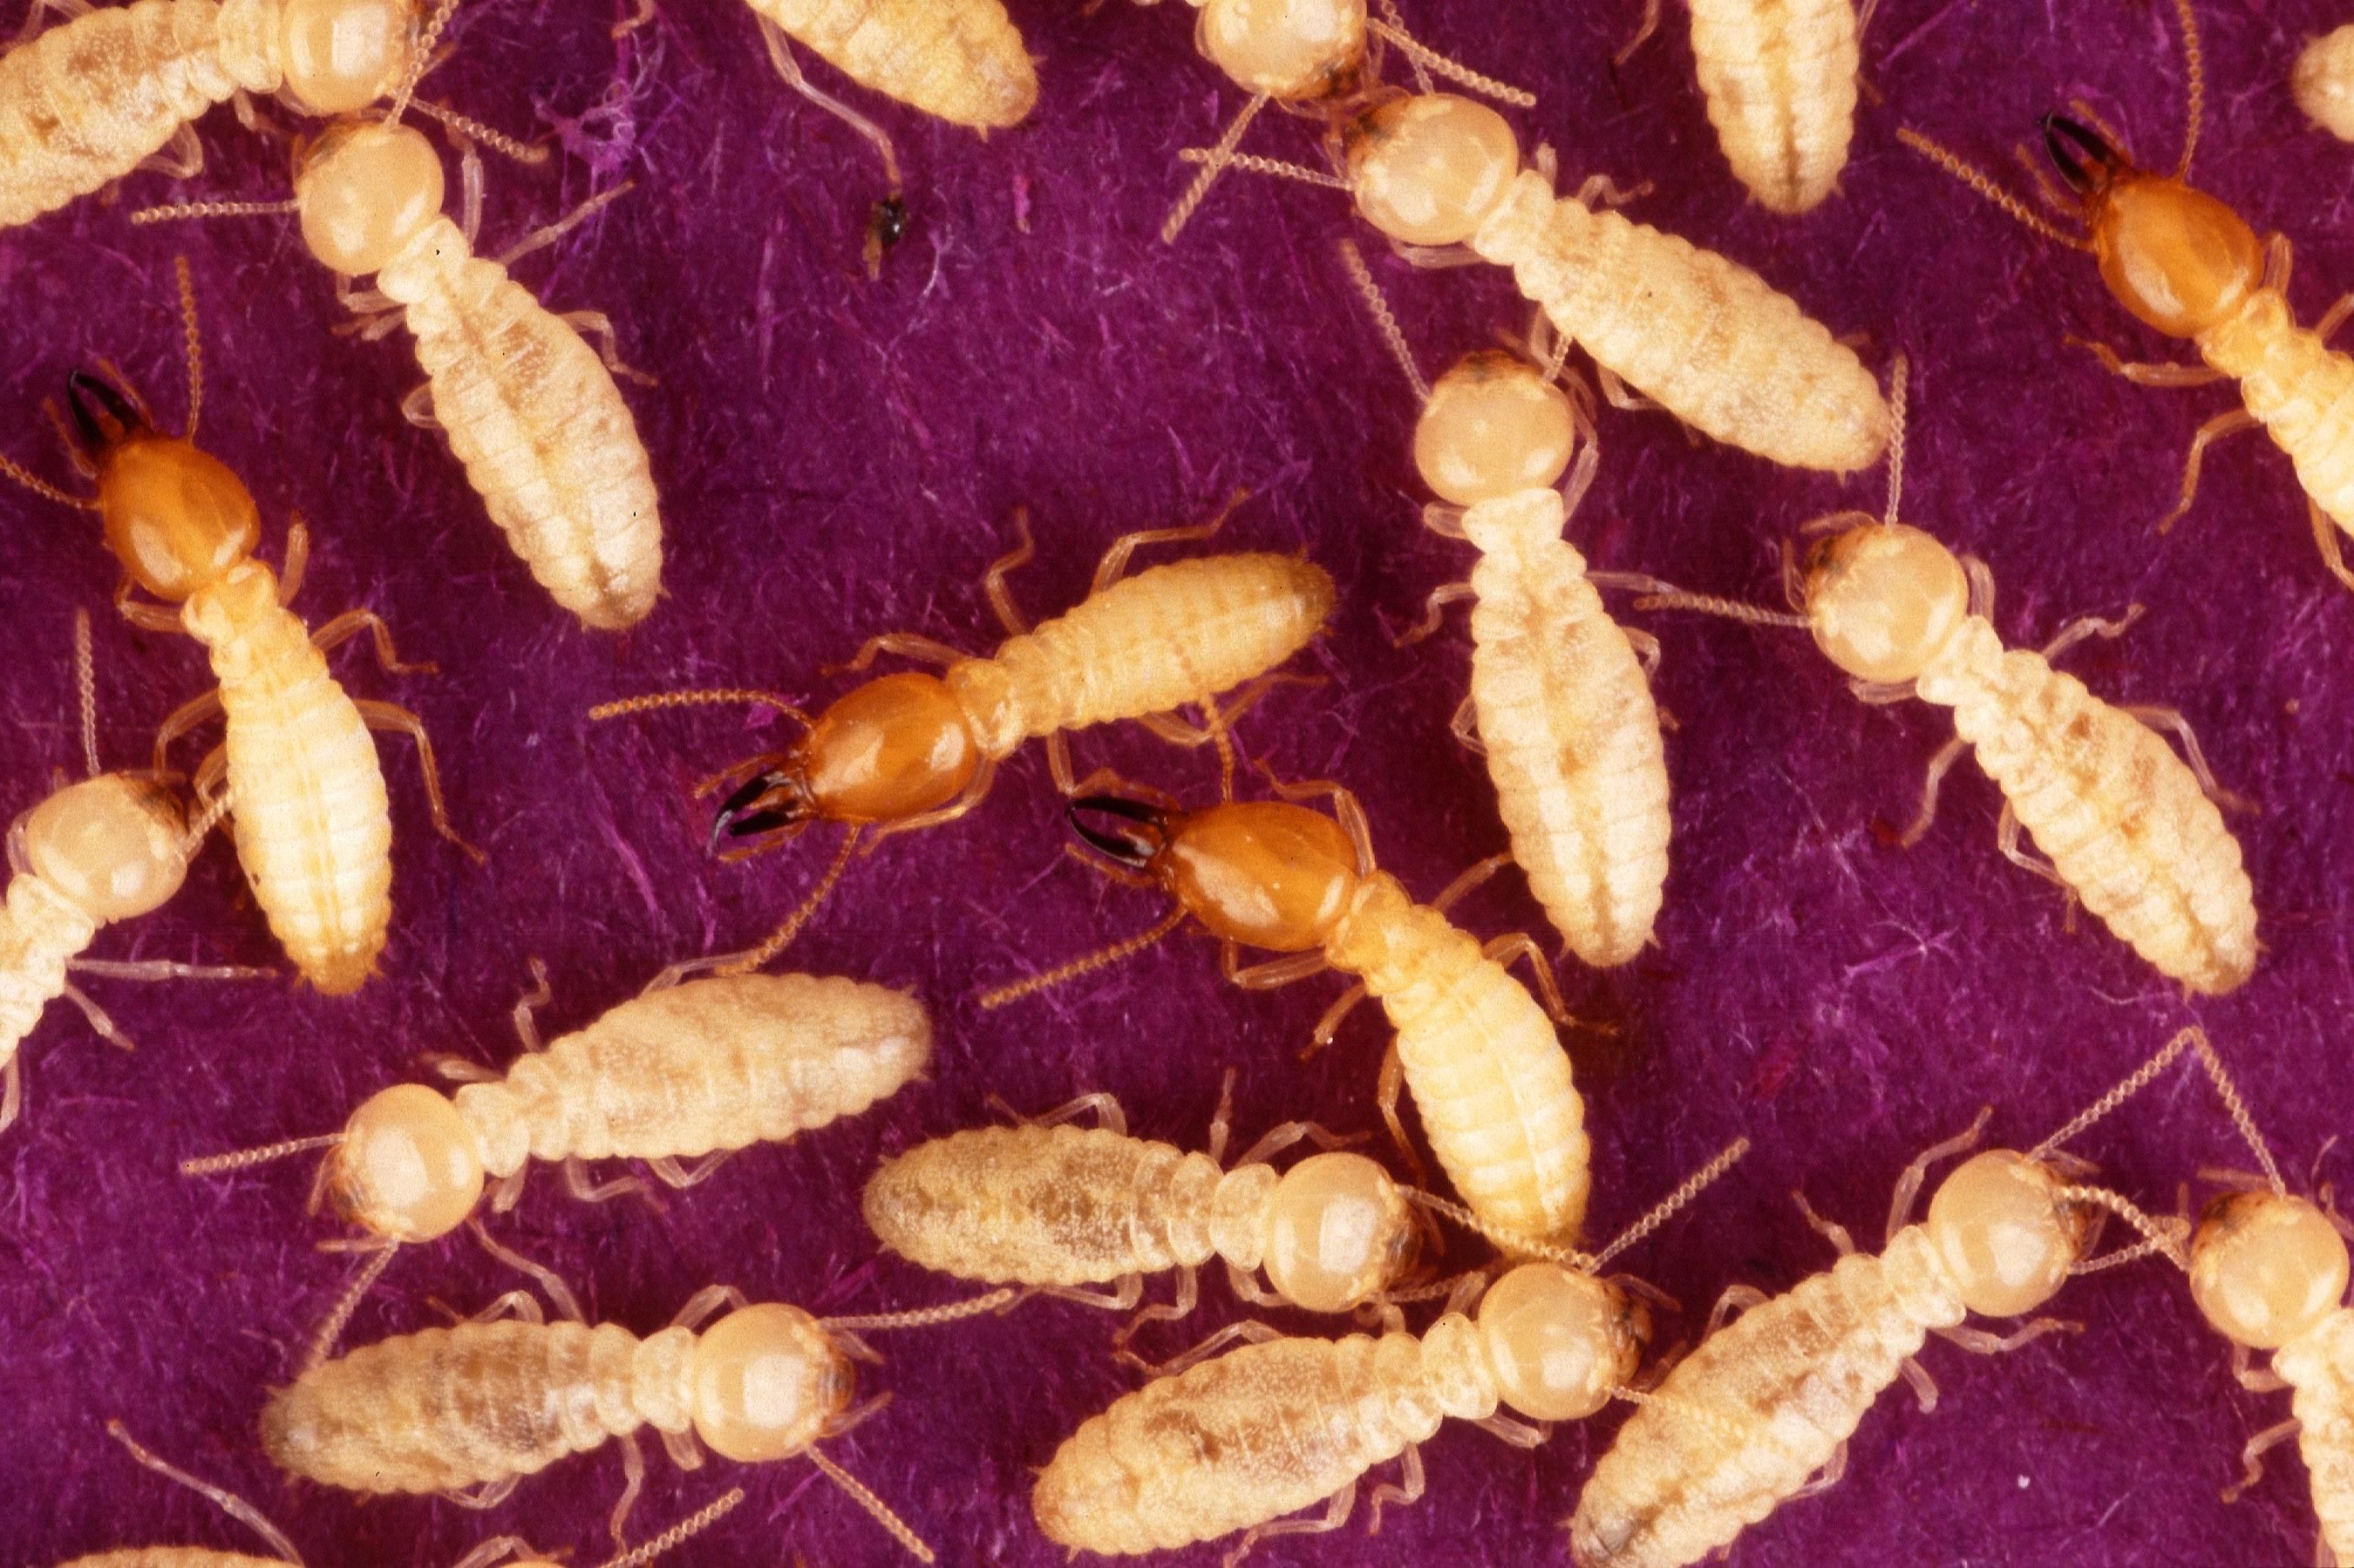 Termites in your rental: Responsibility and treatment